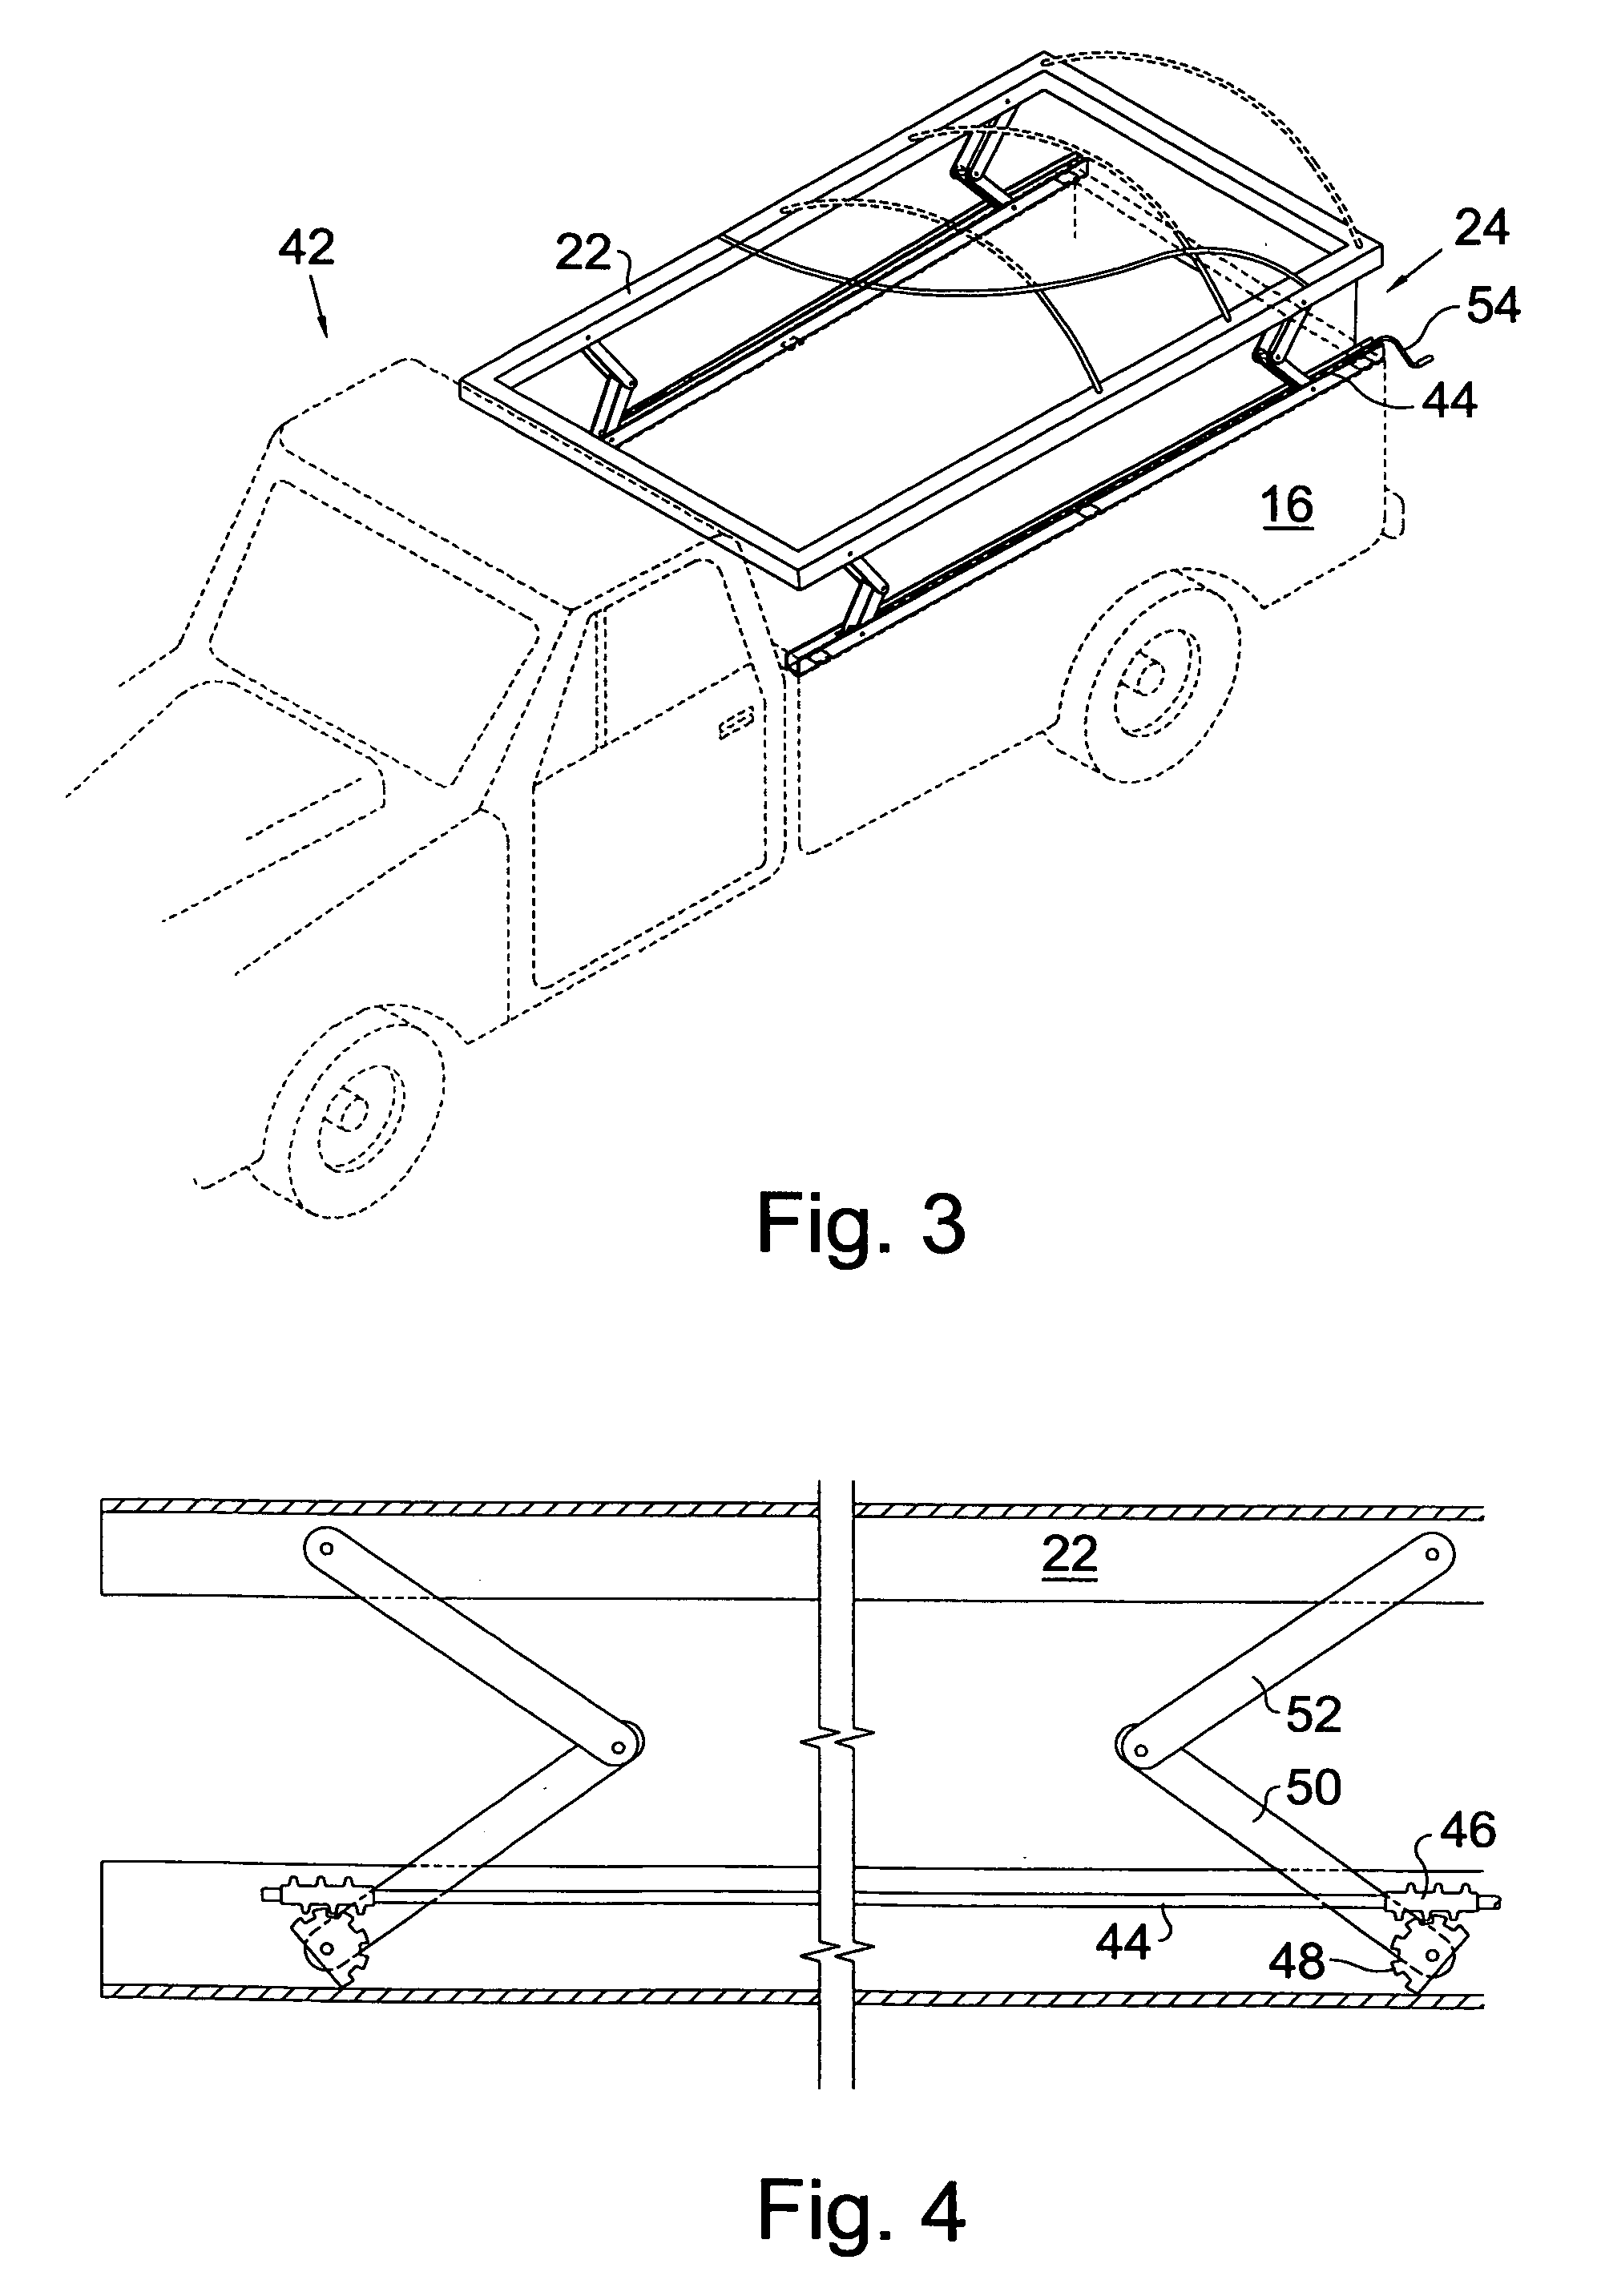 Flexible and stiff wall extension for an open load hauling box on a truck